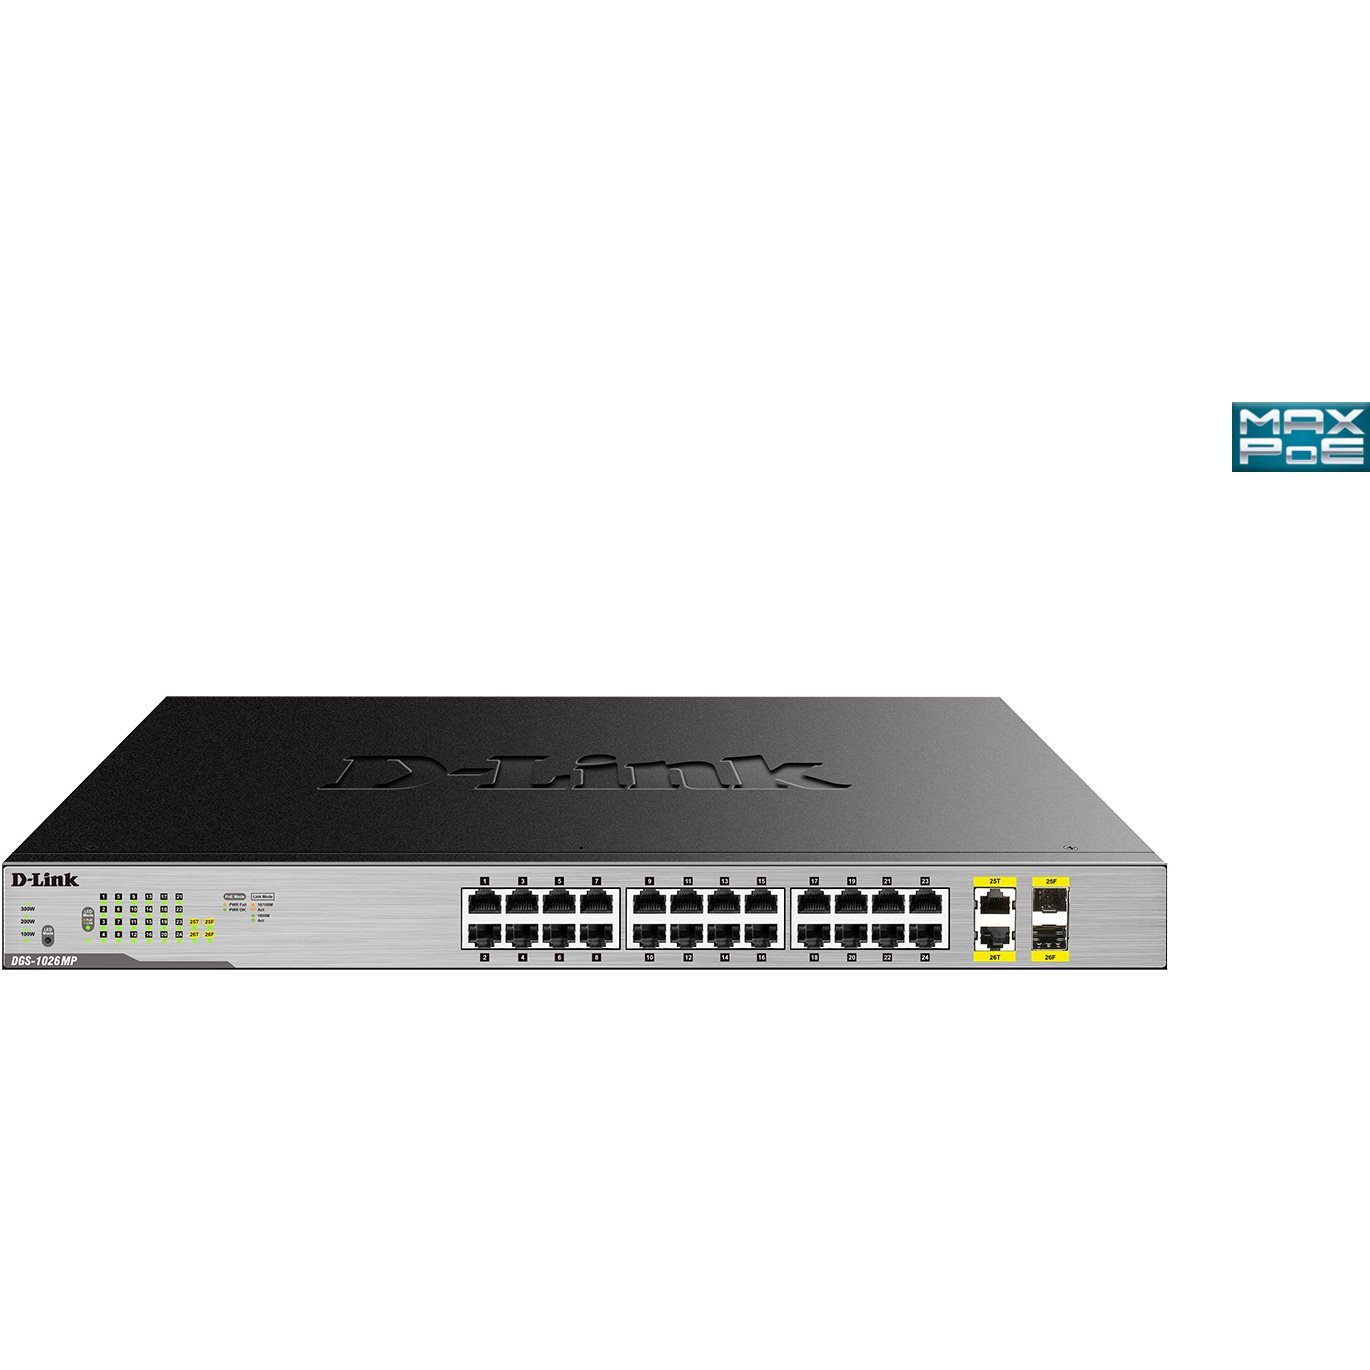 Switch 24 Ports Giga PoE at 370W + 2 Combo SFP DGS-1026MP